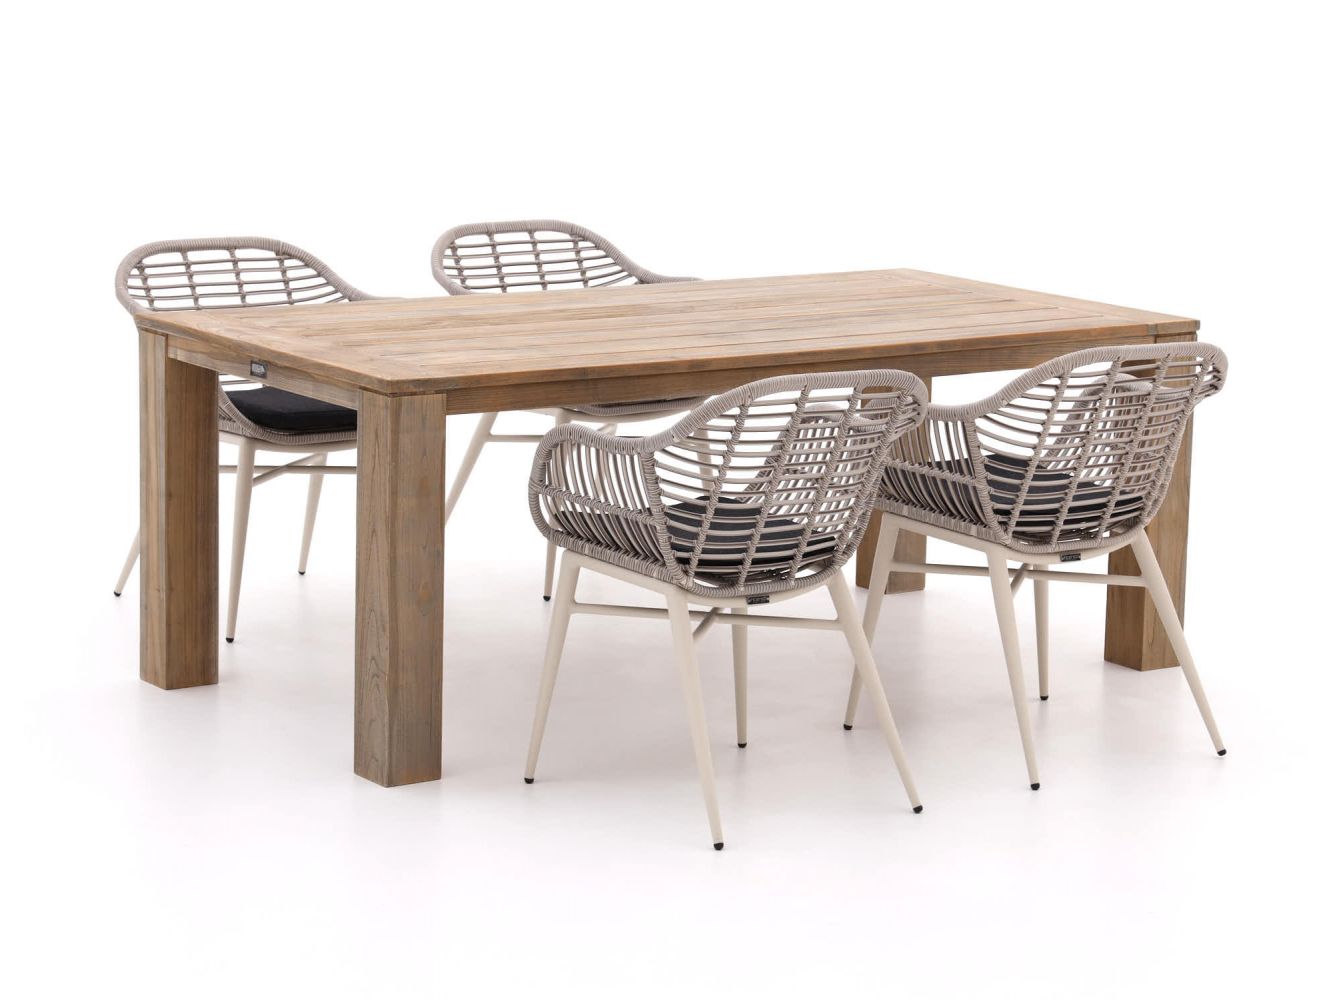 Paard Product Verst Intenso Azora/ROUGH-X 200cm dining tuinset 5-delig - Oyster (incl. kussens)  - Kees Smit